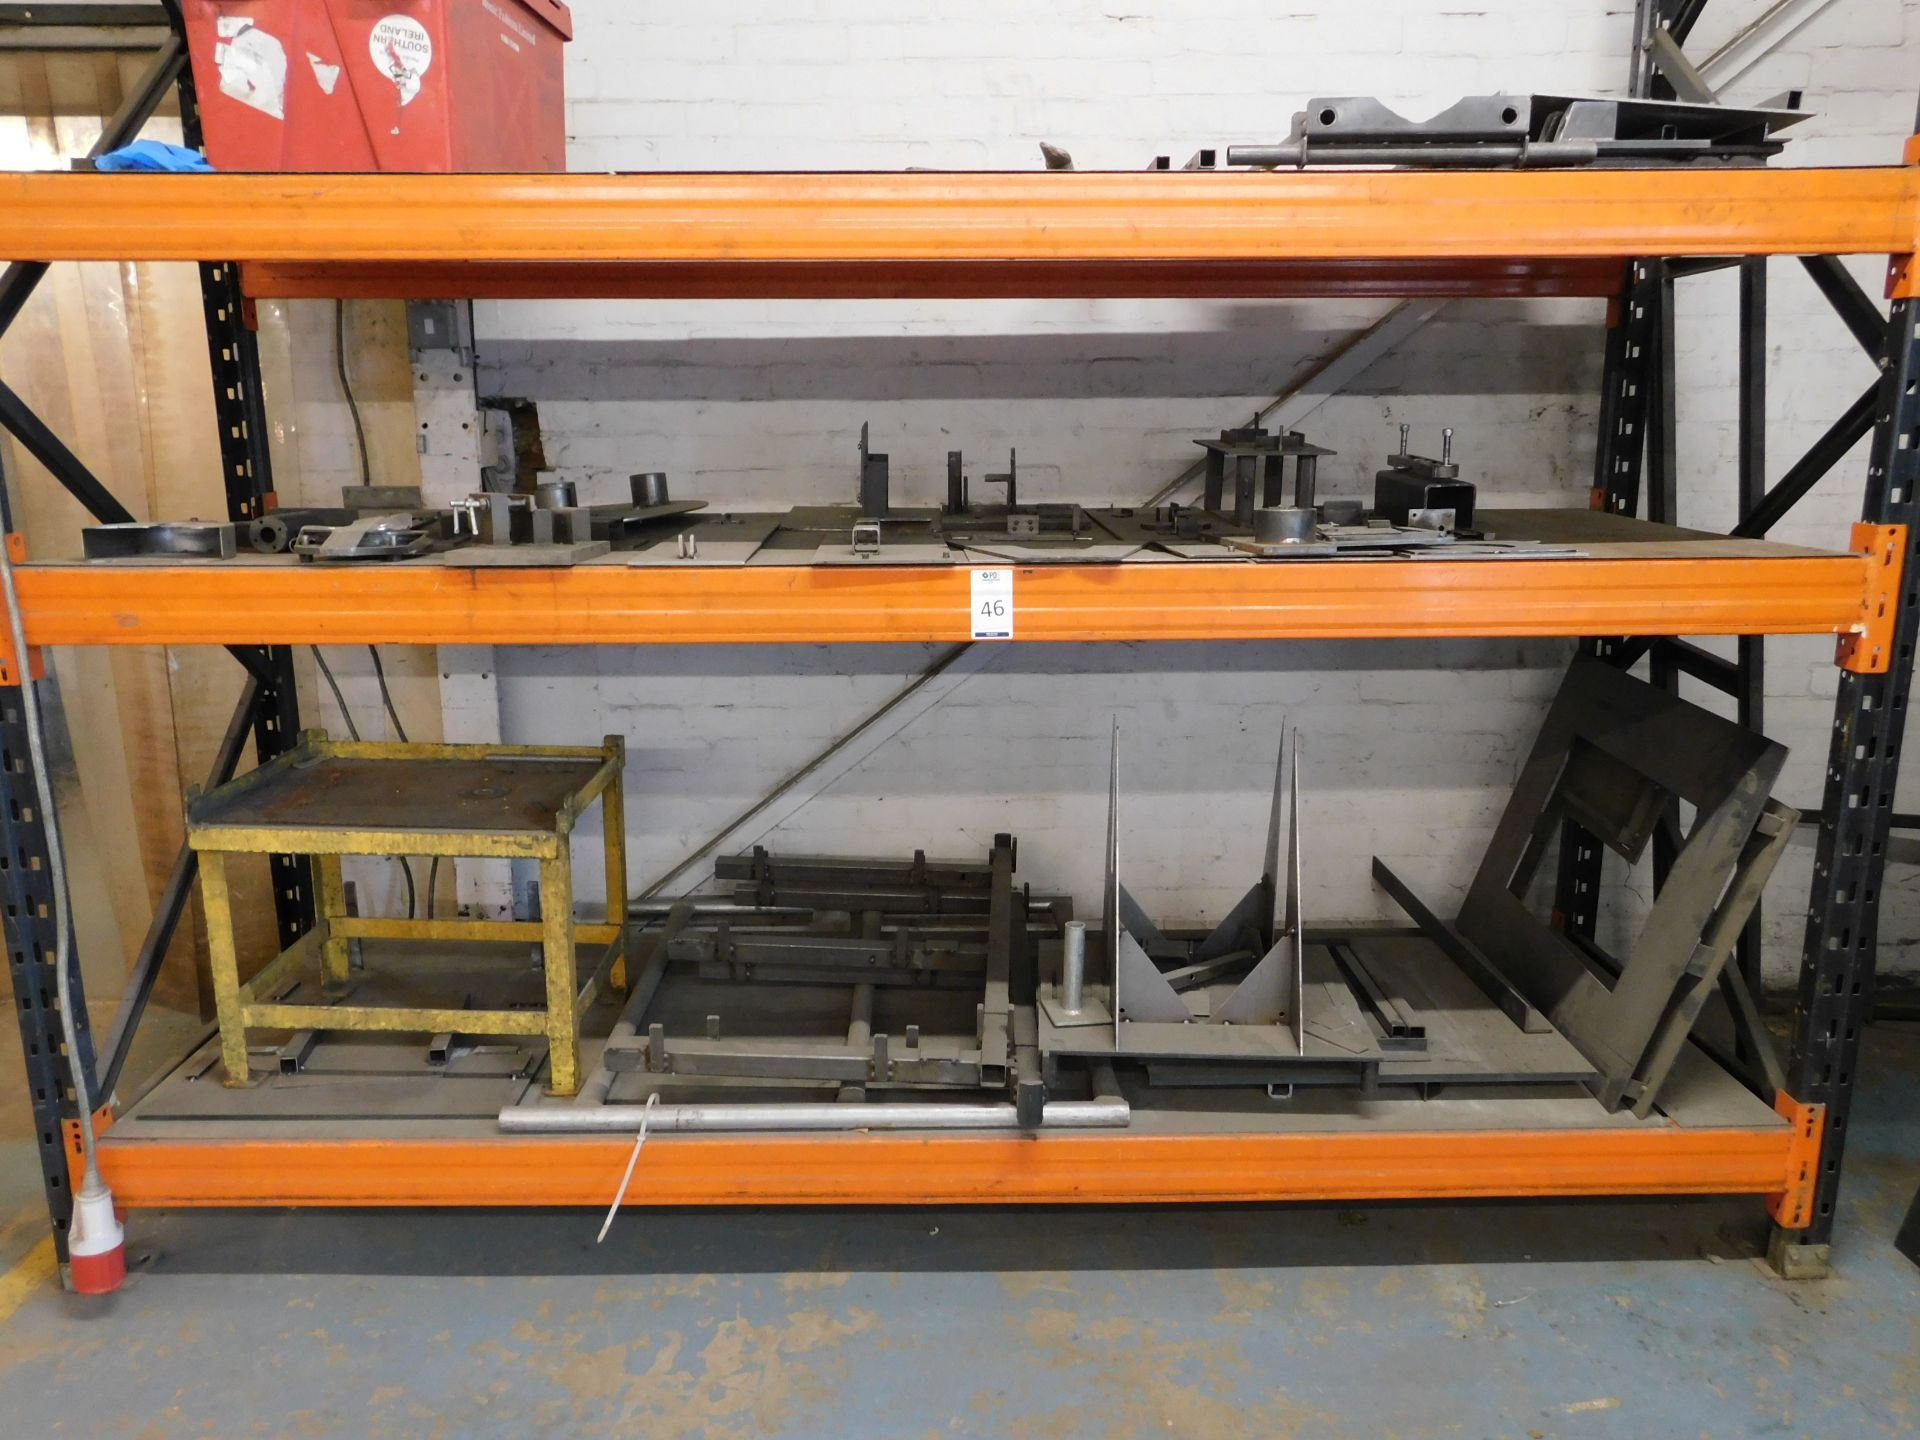 3 Tier Pallet Rack & Two Slotted Steel Racks (Location: Kettering - See General Notes for Details)